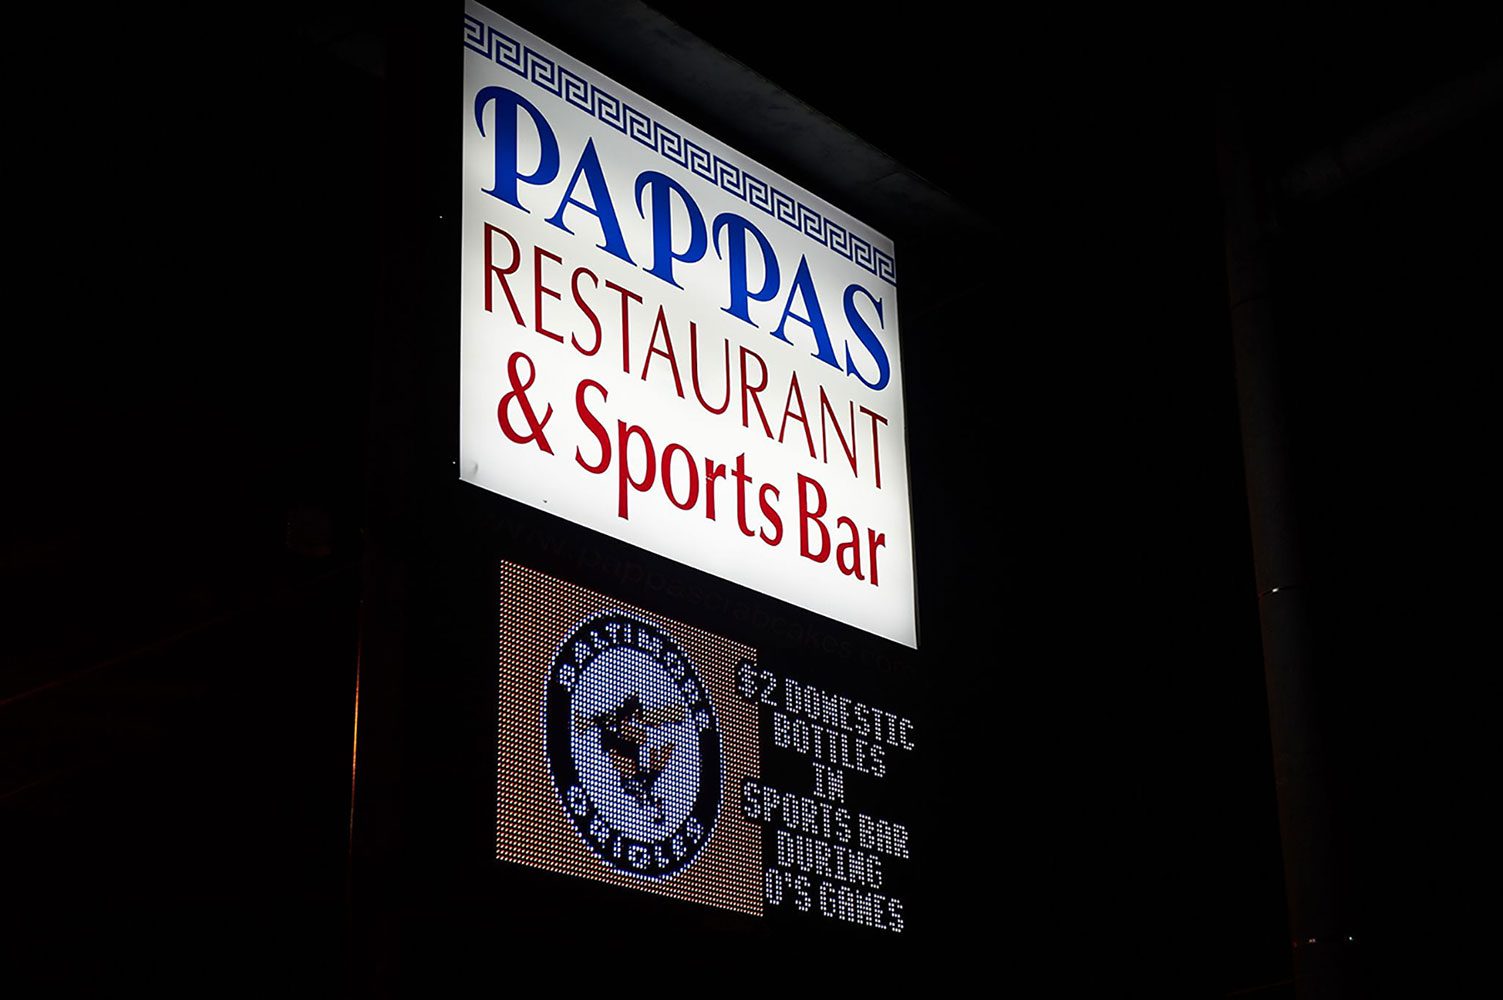 Pappas Restaurant and Sports Bar signage